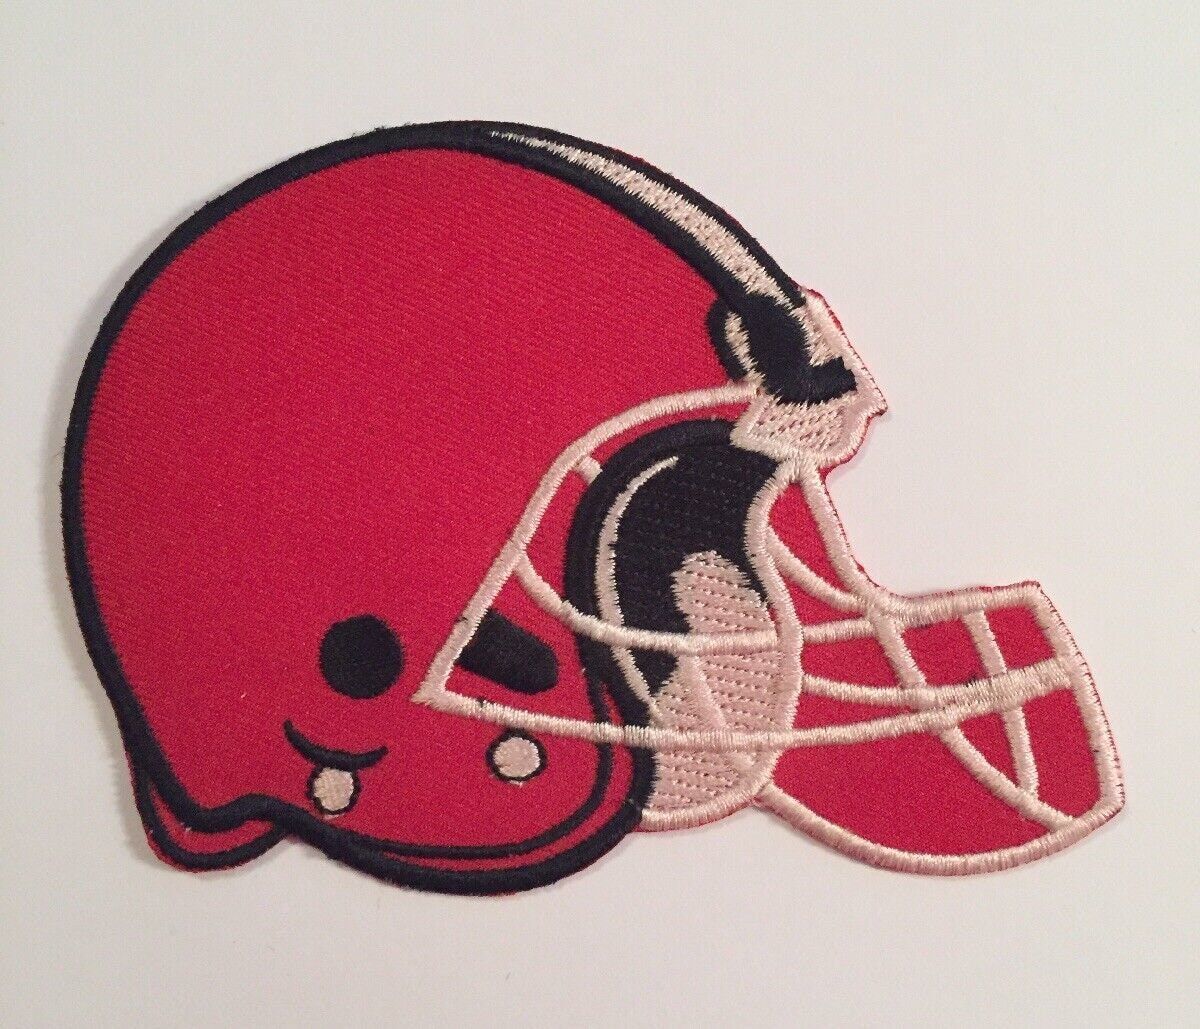 Cleveland Browns Football Logo NFL Small Iron/Sew On Embroidered Patch Lot  Of 2